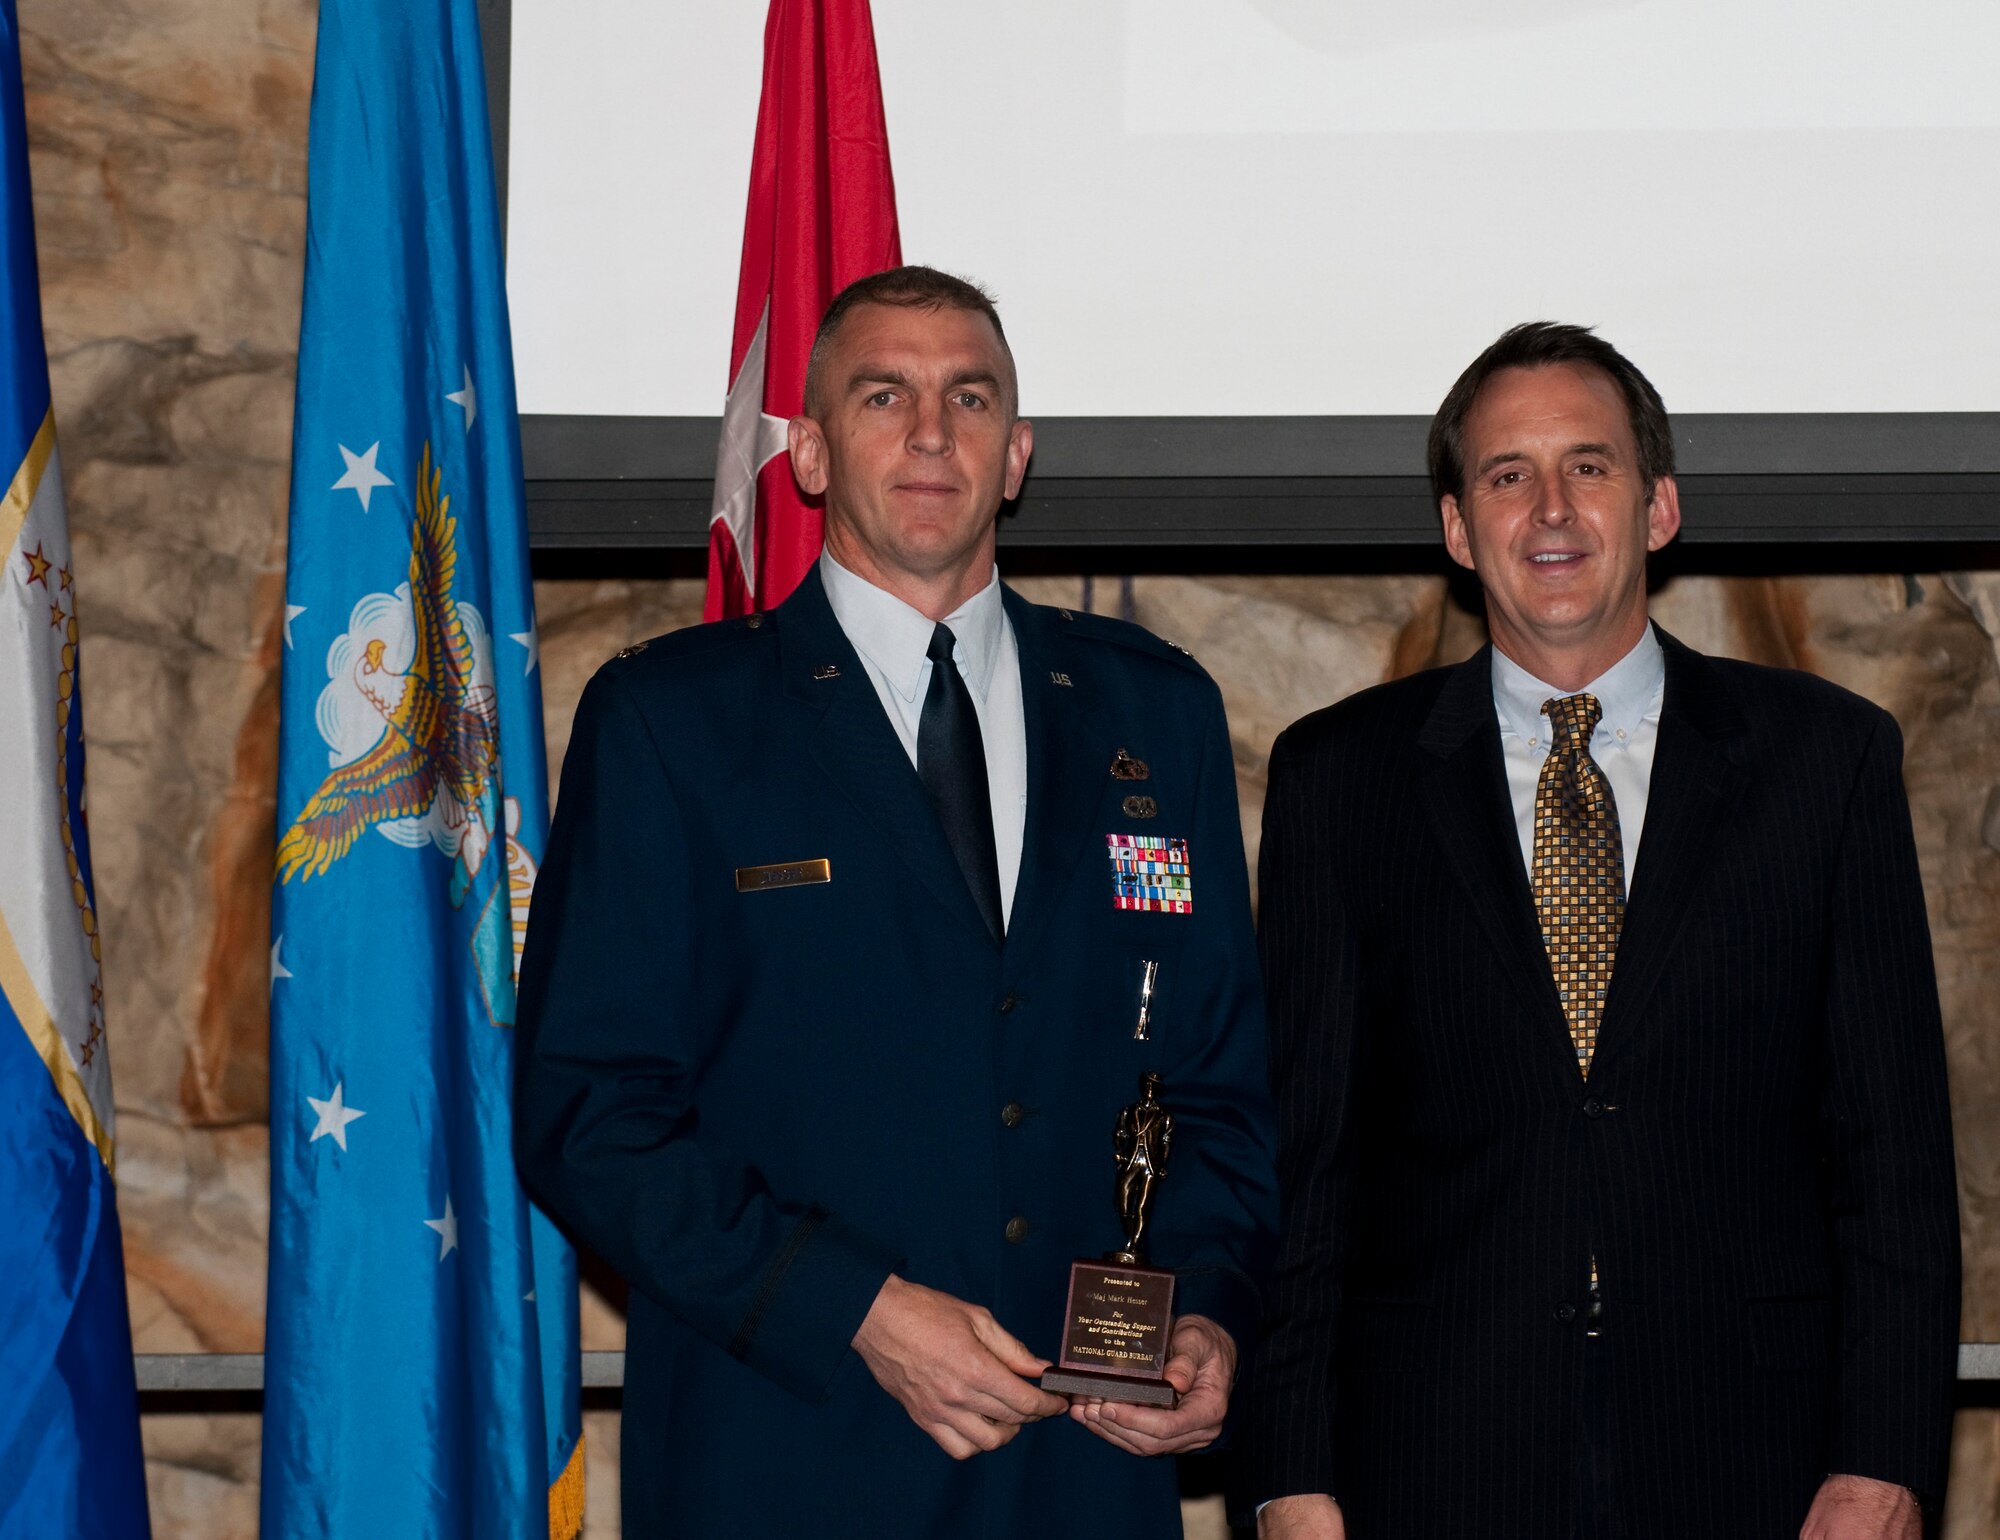 Governor of Minnesota Tim Pawlenty (right) stands with Air National Guard Equal Opportunity Professional of the Year, Lt. Col. Mark Hesser, 133rd Airlift Wing, during the Wing Recognition Ceremony Dec. 11, 2010 in St. Paul, Minn.
USAF official photo by Tech. Sgt. Erik Gudmundson